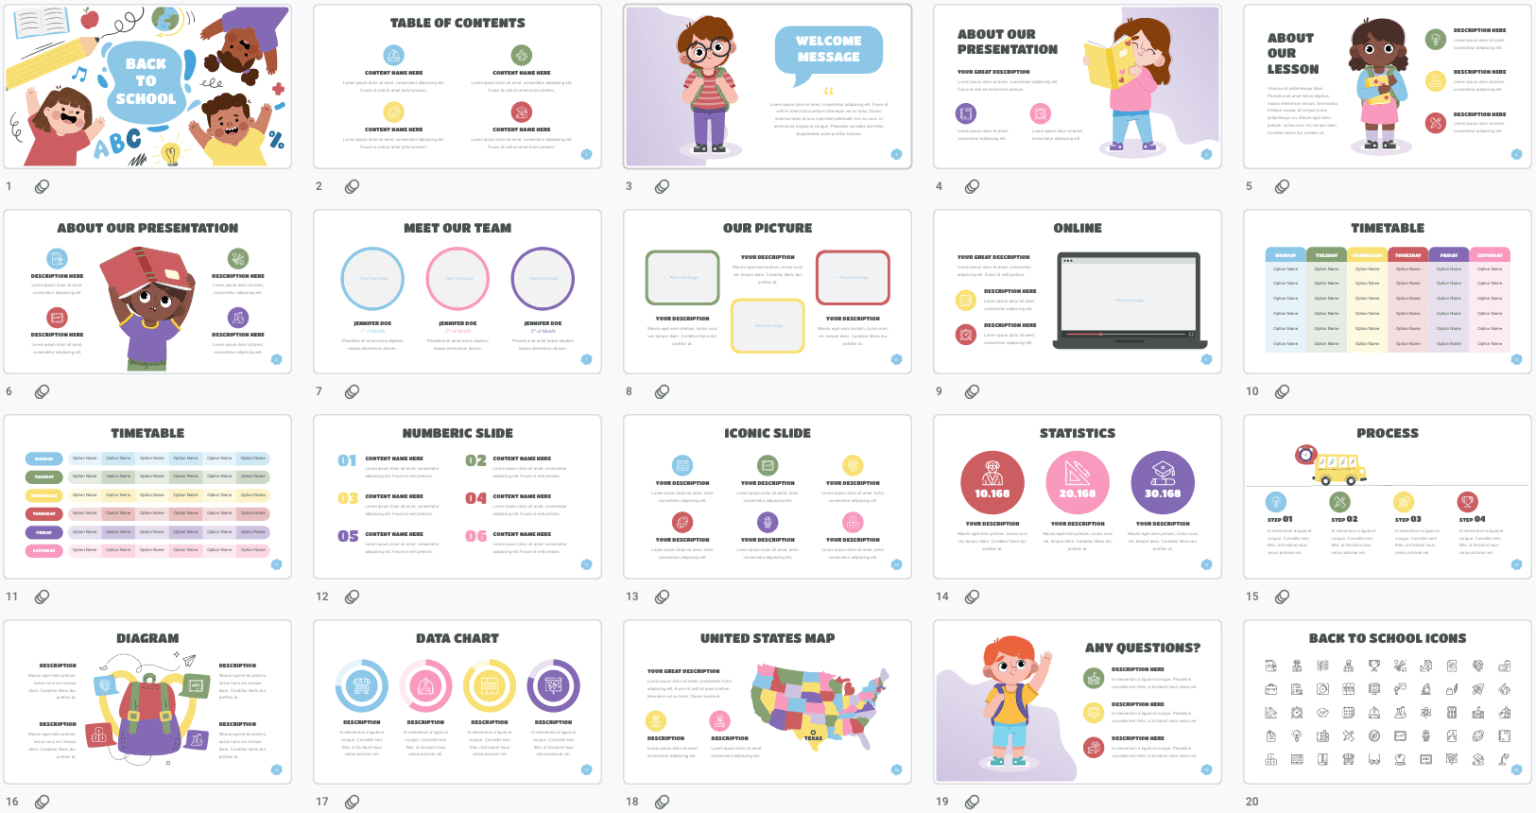 20+ Free Cute Google Slides Templates for a Pretty Presentation Just